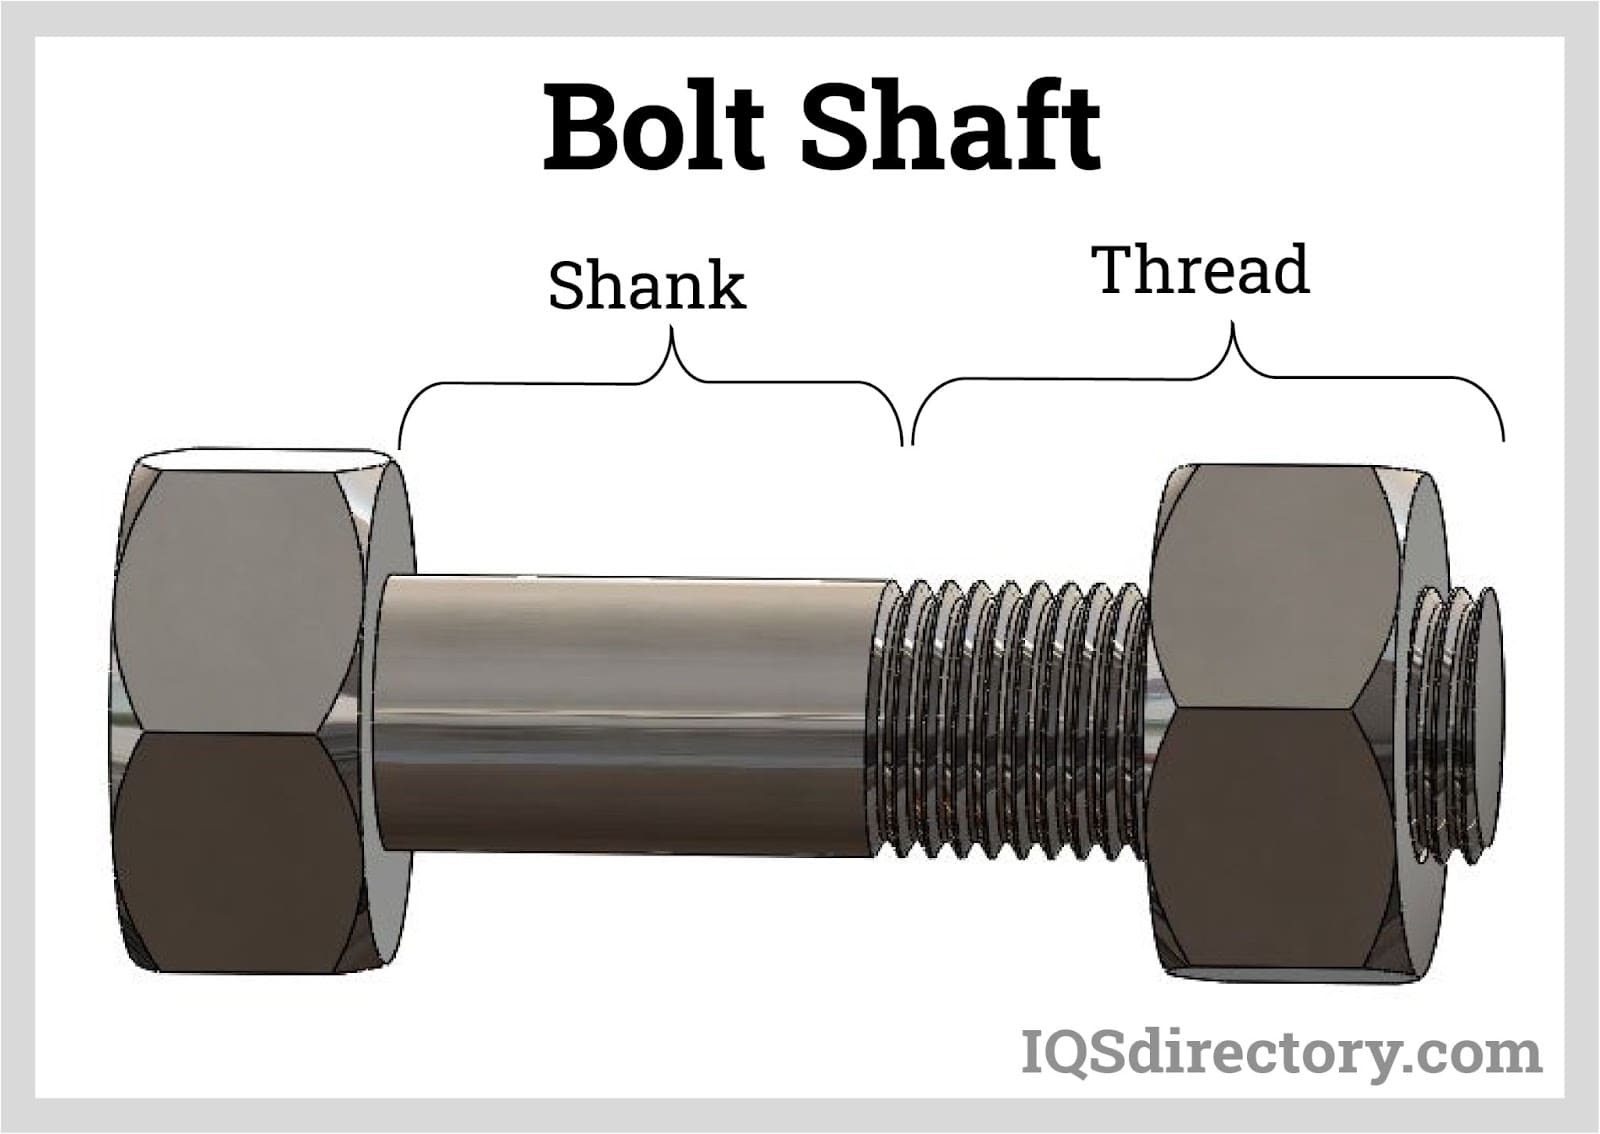 Threaded Fastener Parts and Terminology